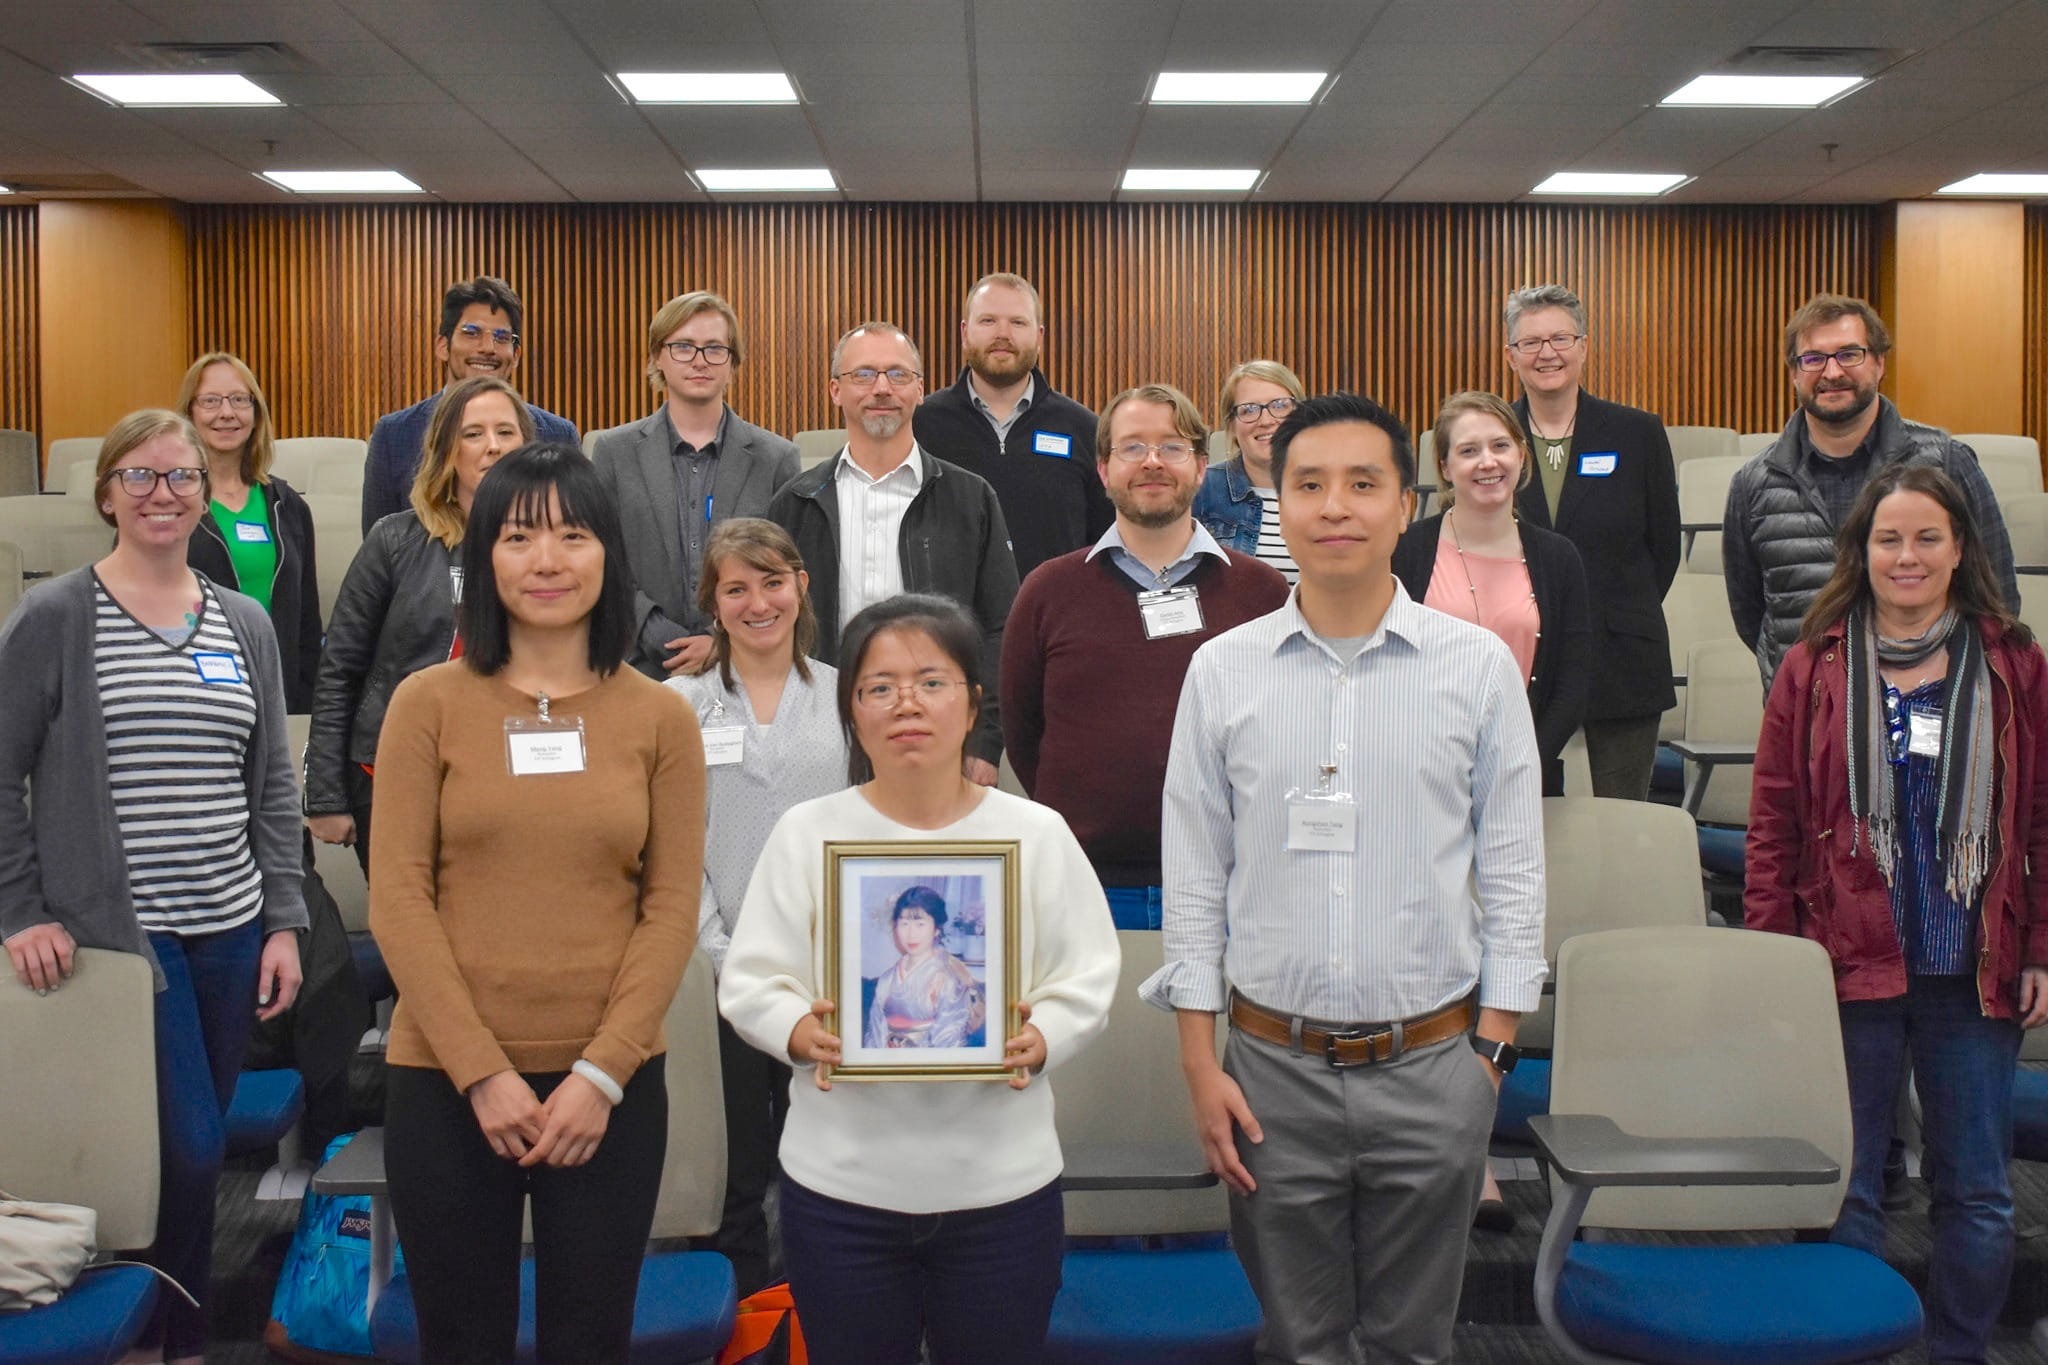 Group shot of 18 of the attendees at the UTASCILT conference, with the prize winners in the front row. The woman in the middle is holding a framed photograph of Yumi Nakamura.